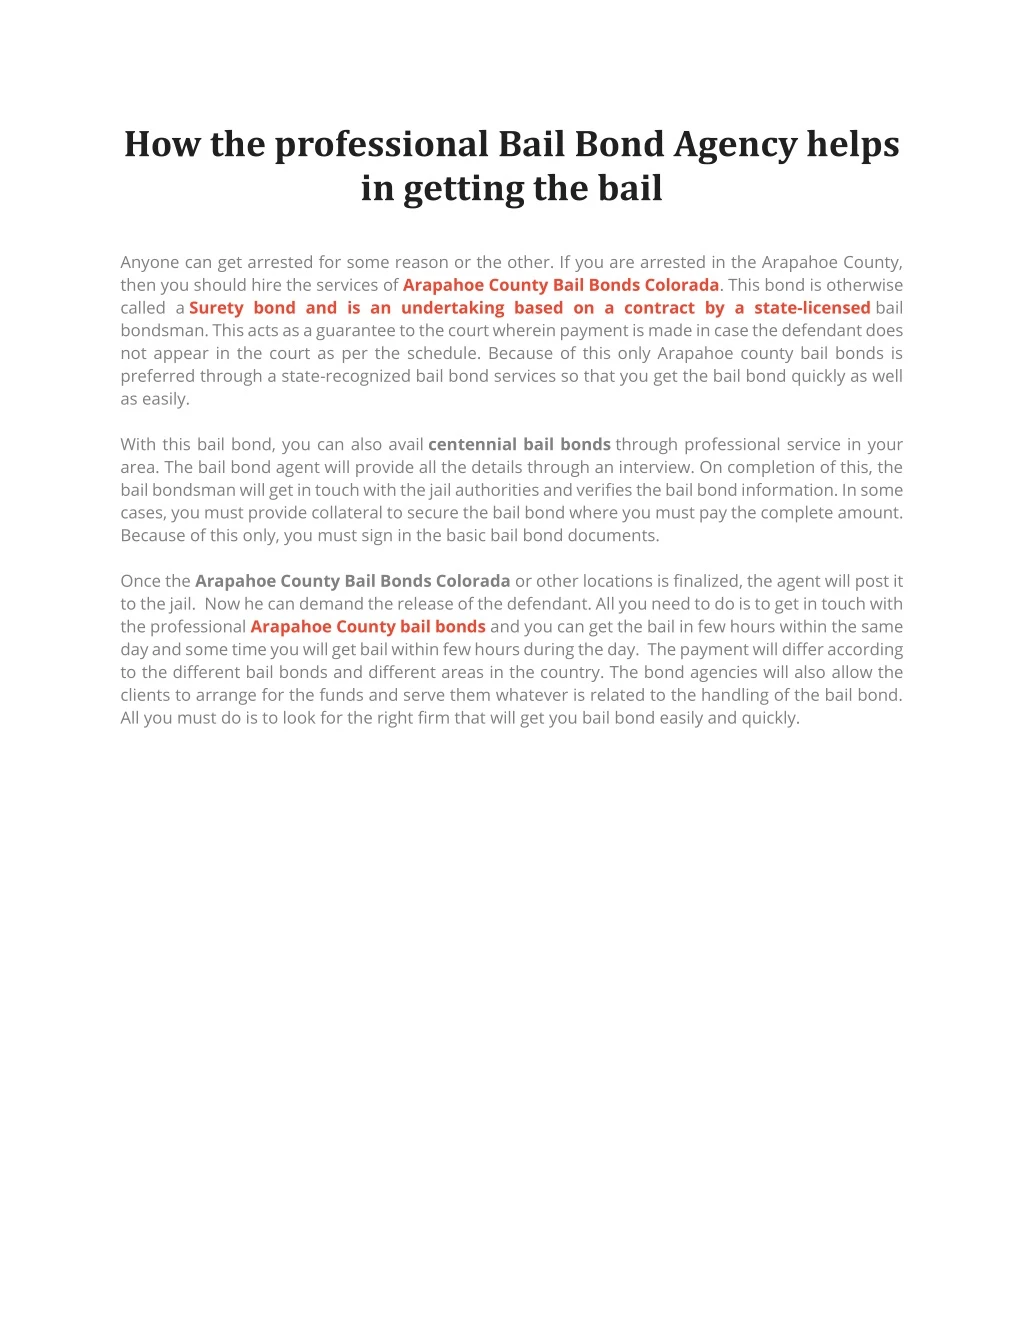 how the professional bail bond agency helps